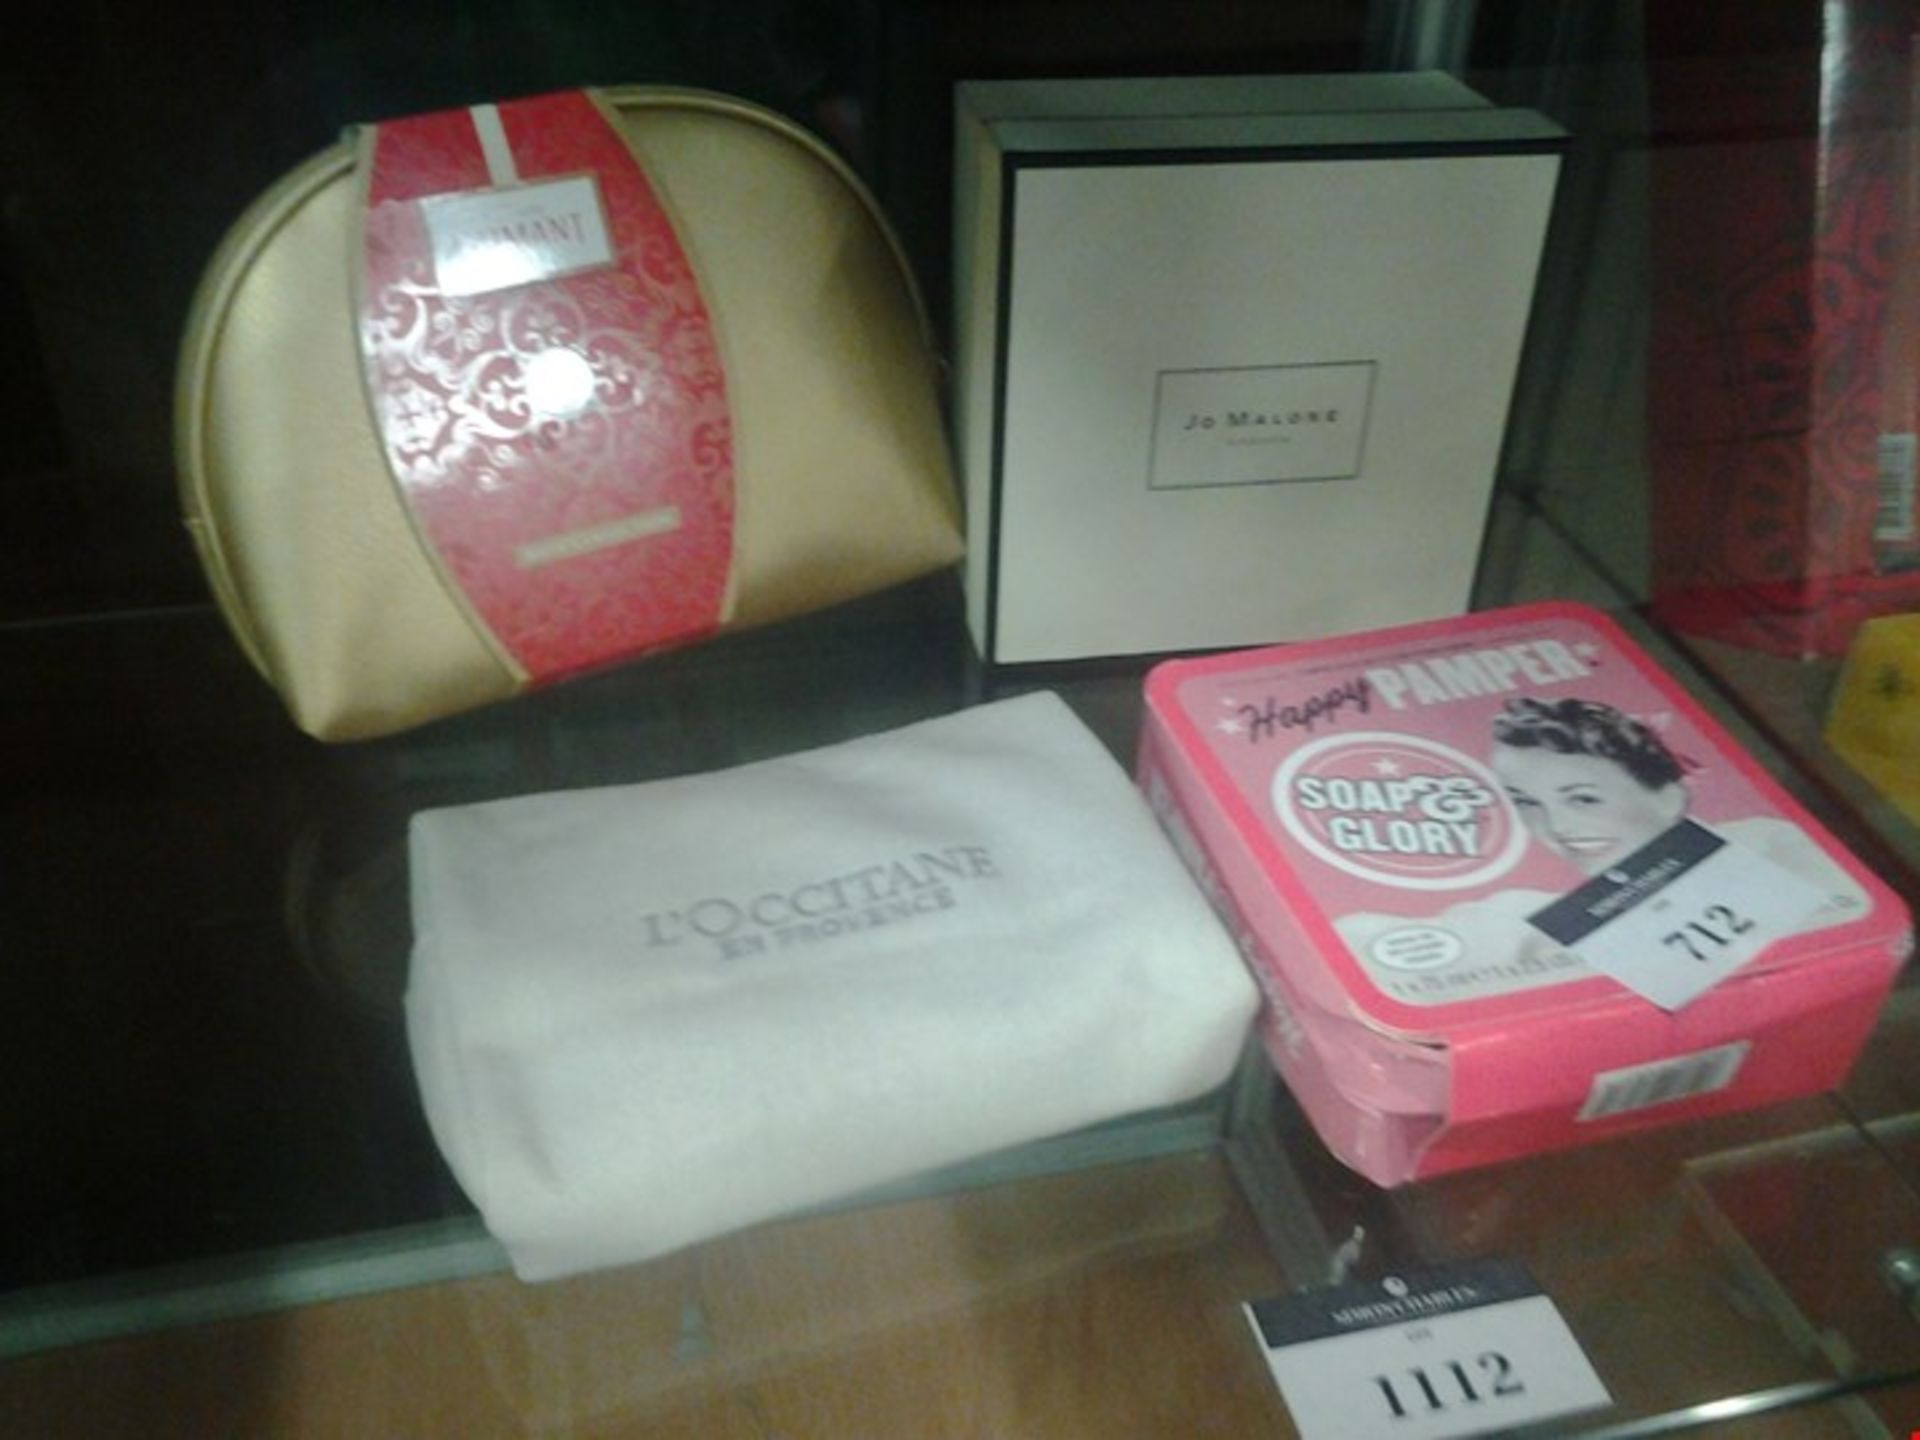 4 ASSORTED LADIES COSMETICS BOXSETS INCLUDING LOCCITANE, SOAP AND GLORY, JO MALONE AND LAIMANT....